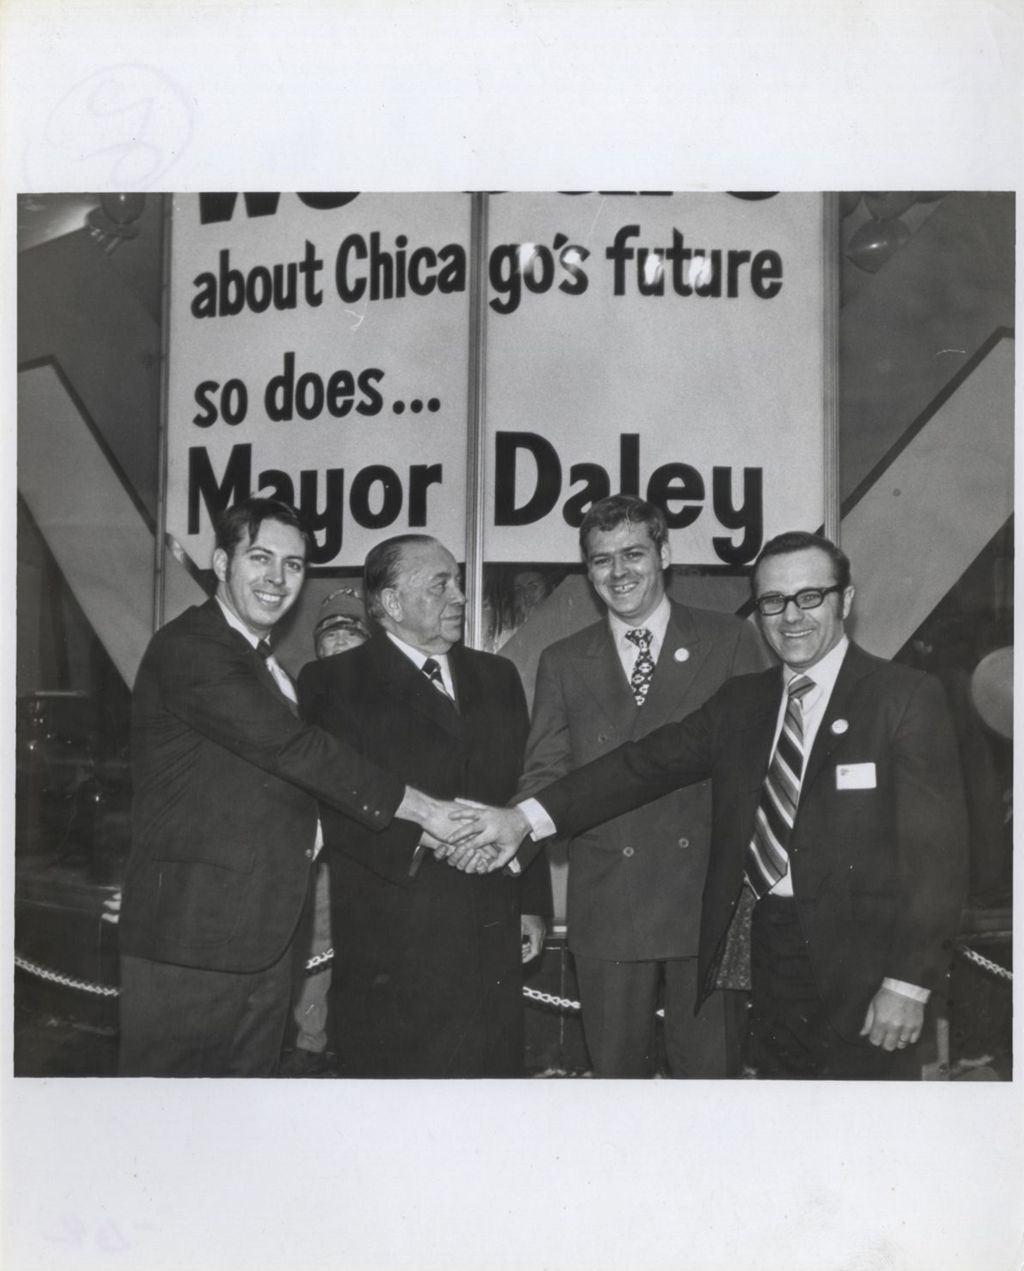 We Care Daley re-election campaign event